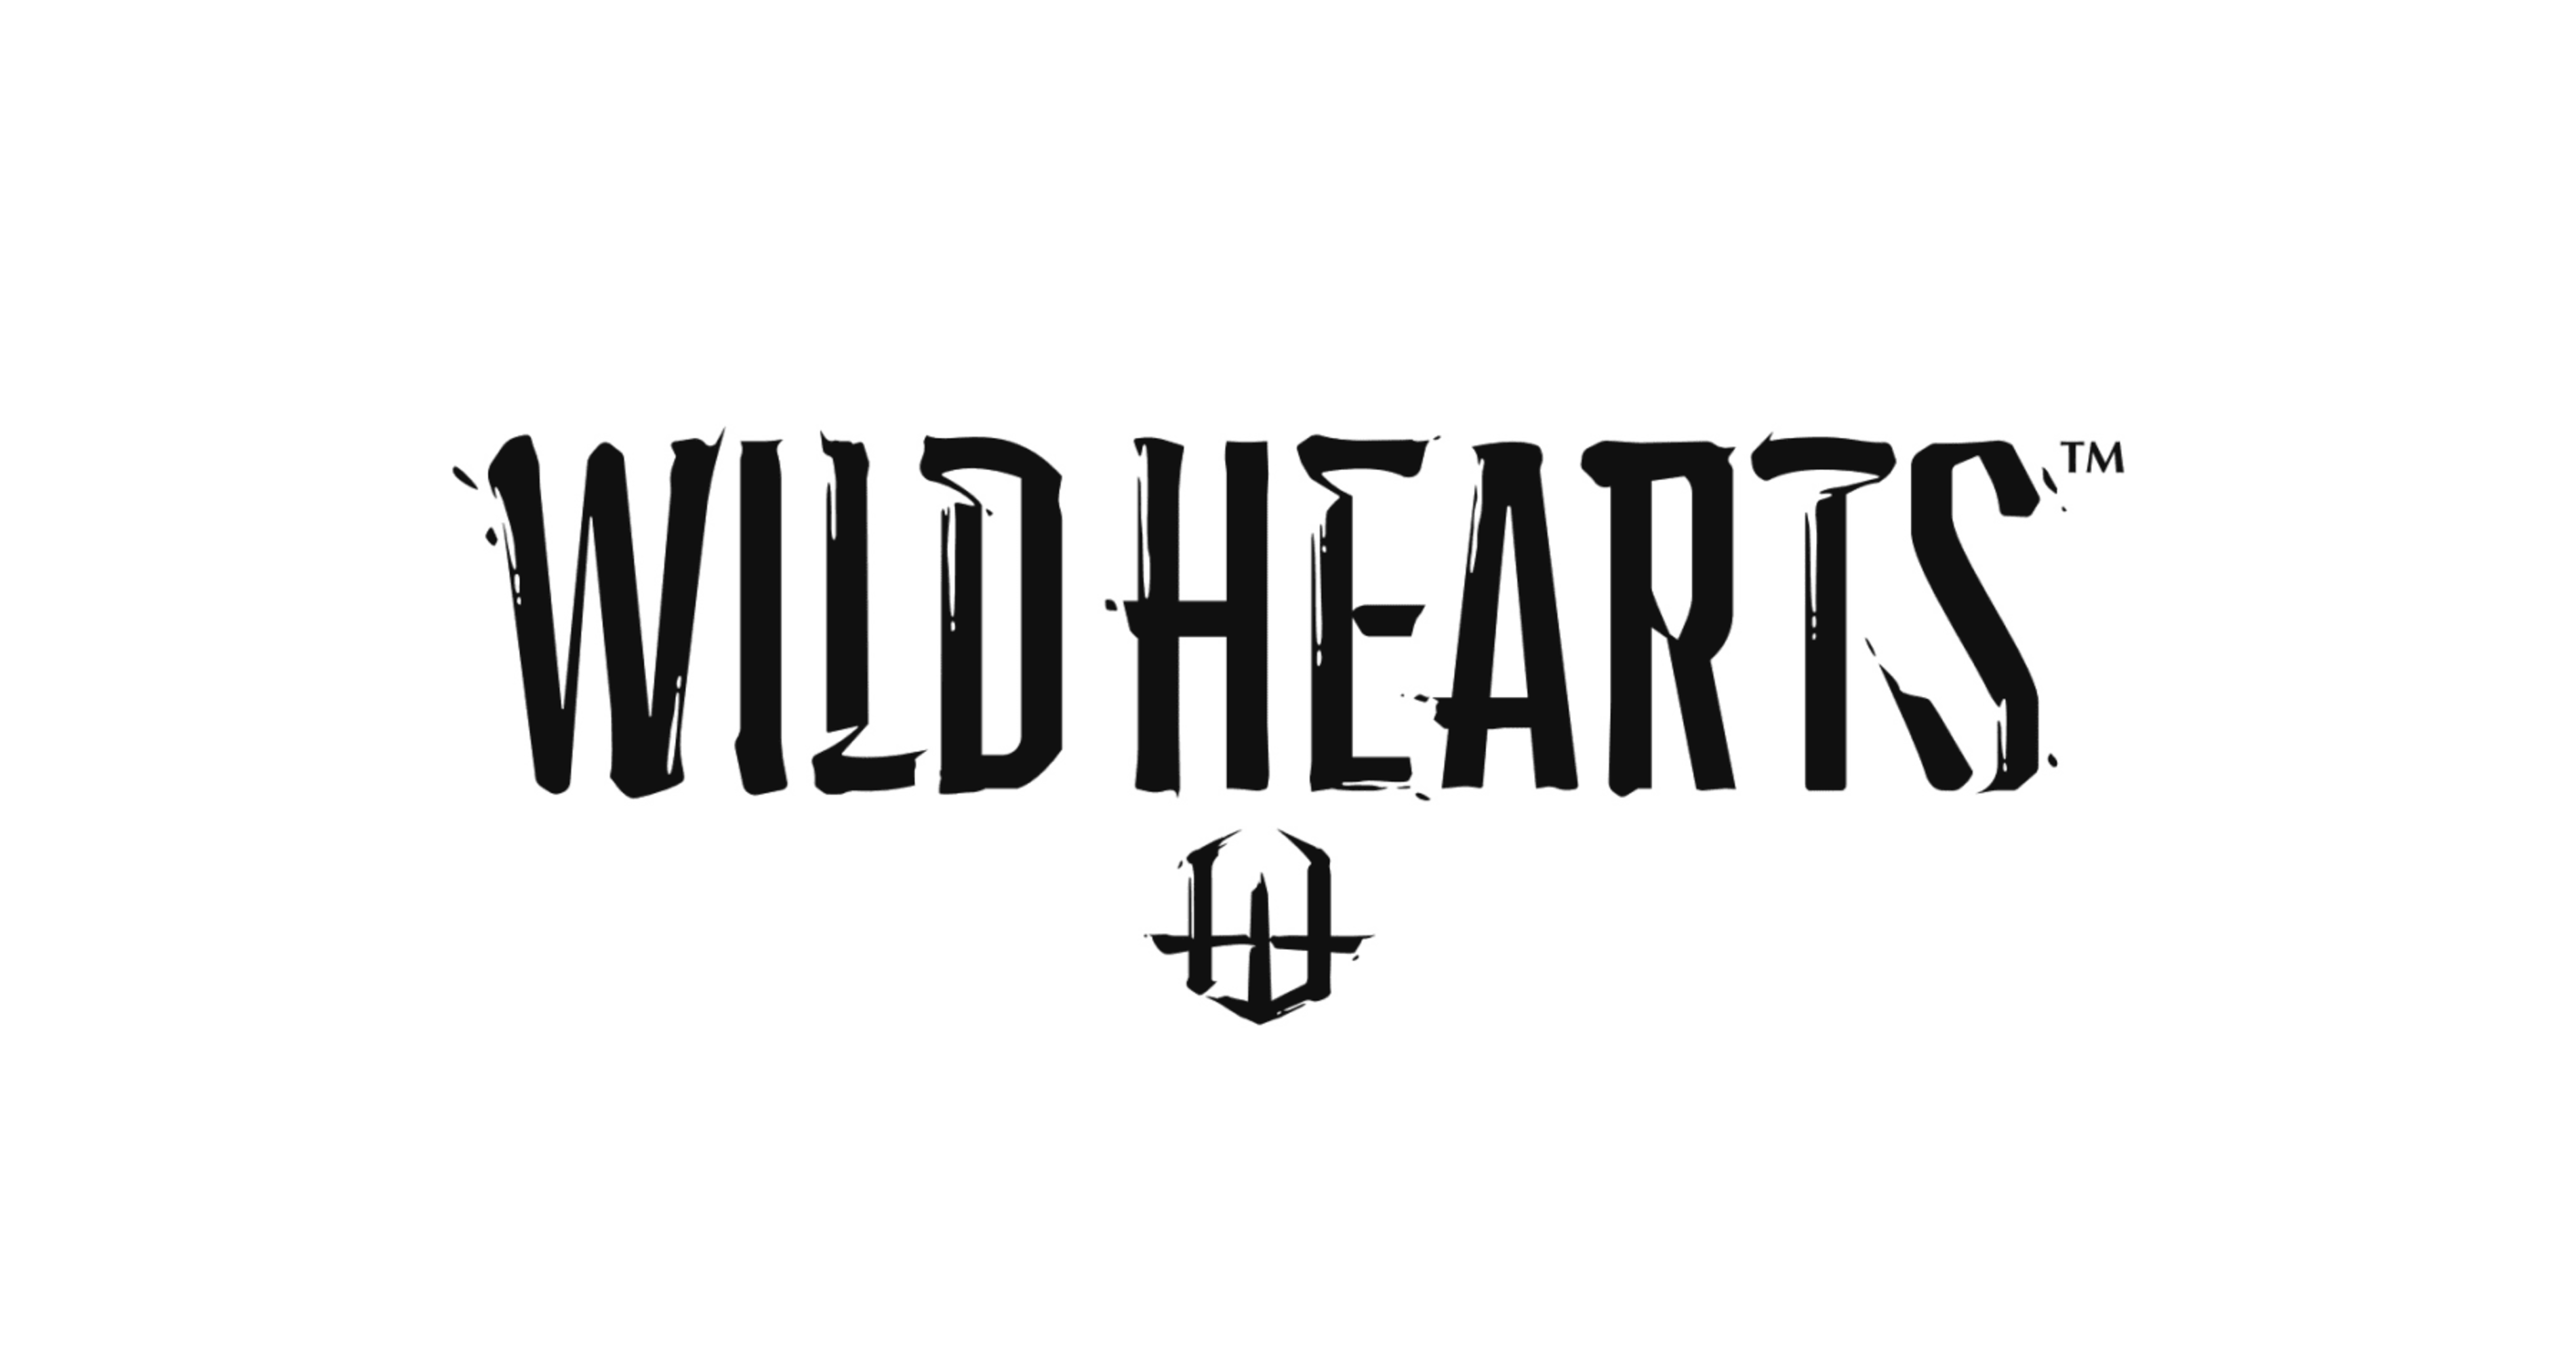 Will Wild Hearts have crossplay and cross-platform support?